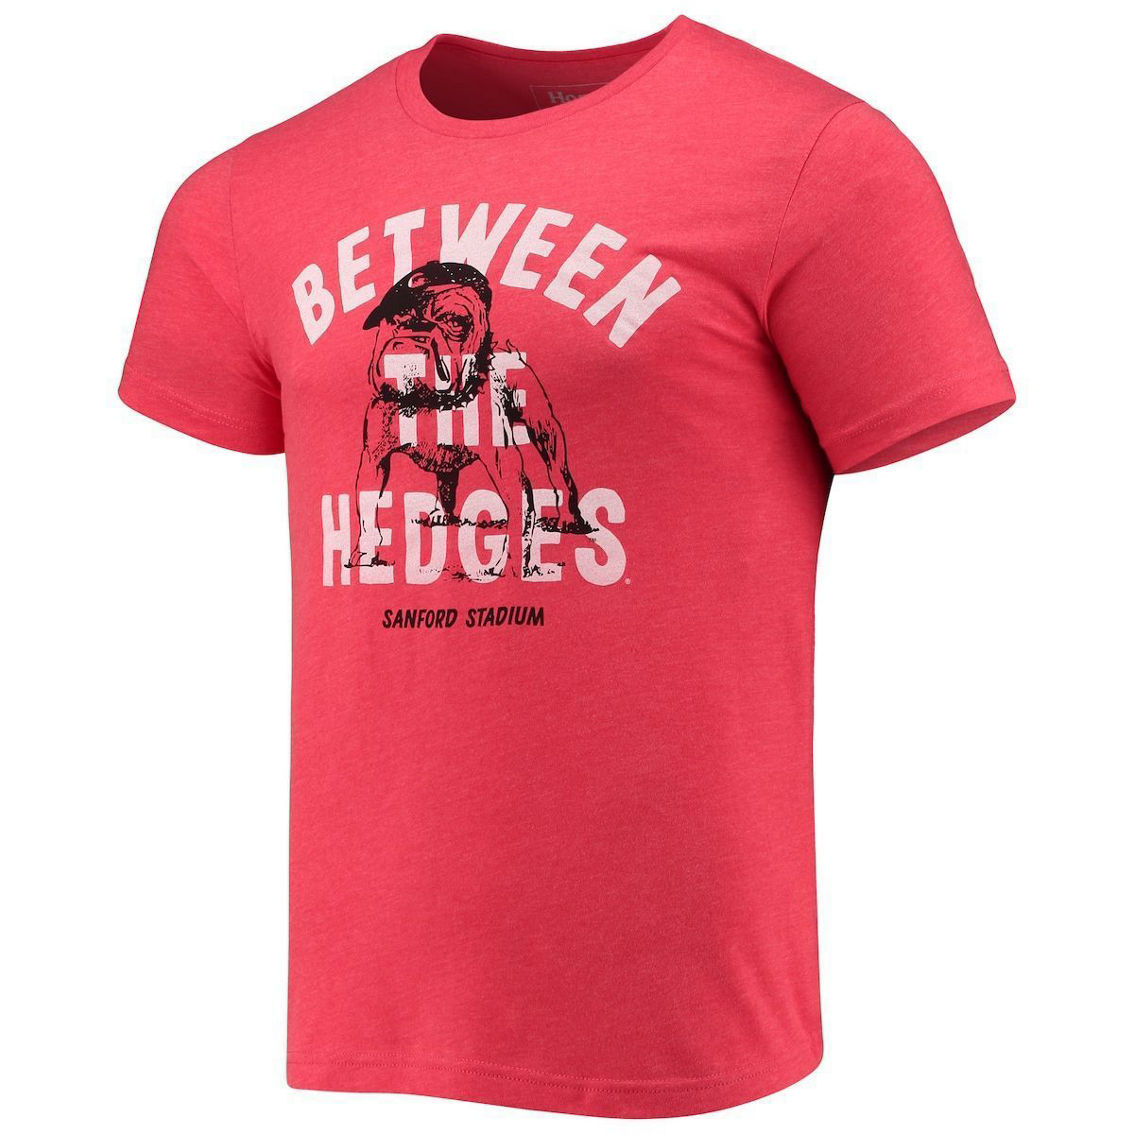 Homefield Men's Heathered Red Georgia Bulldogs Vintage Between the Hedges T-Shirt - Image 3 of 4